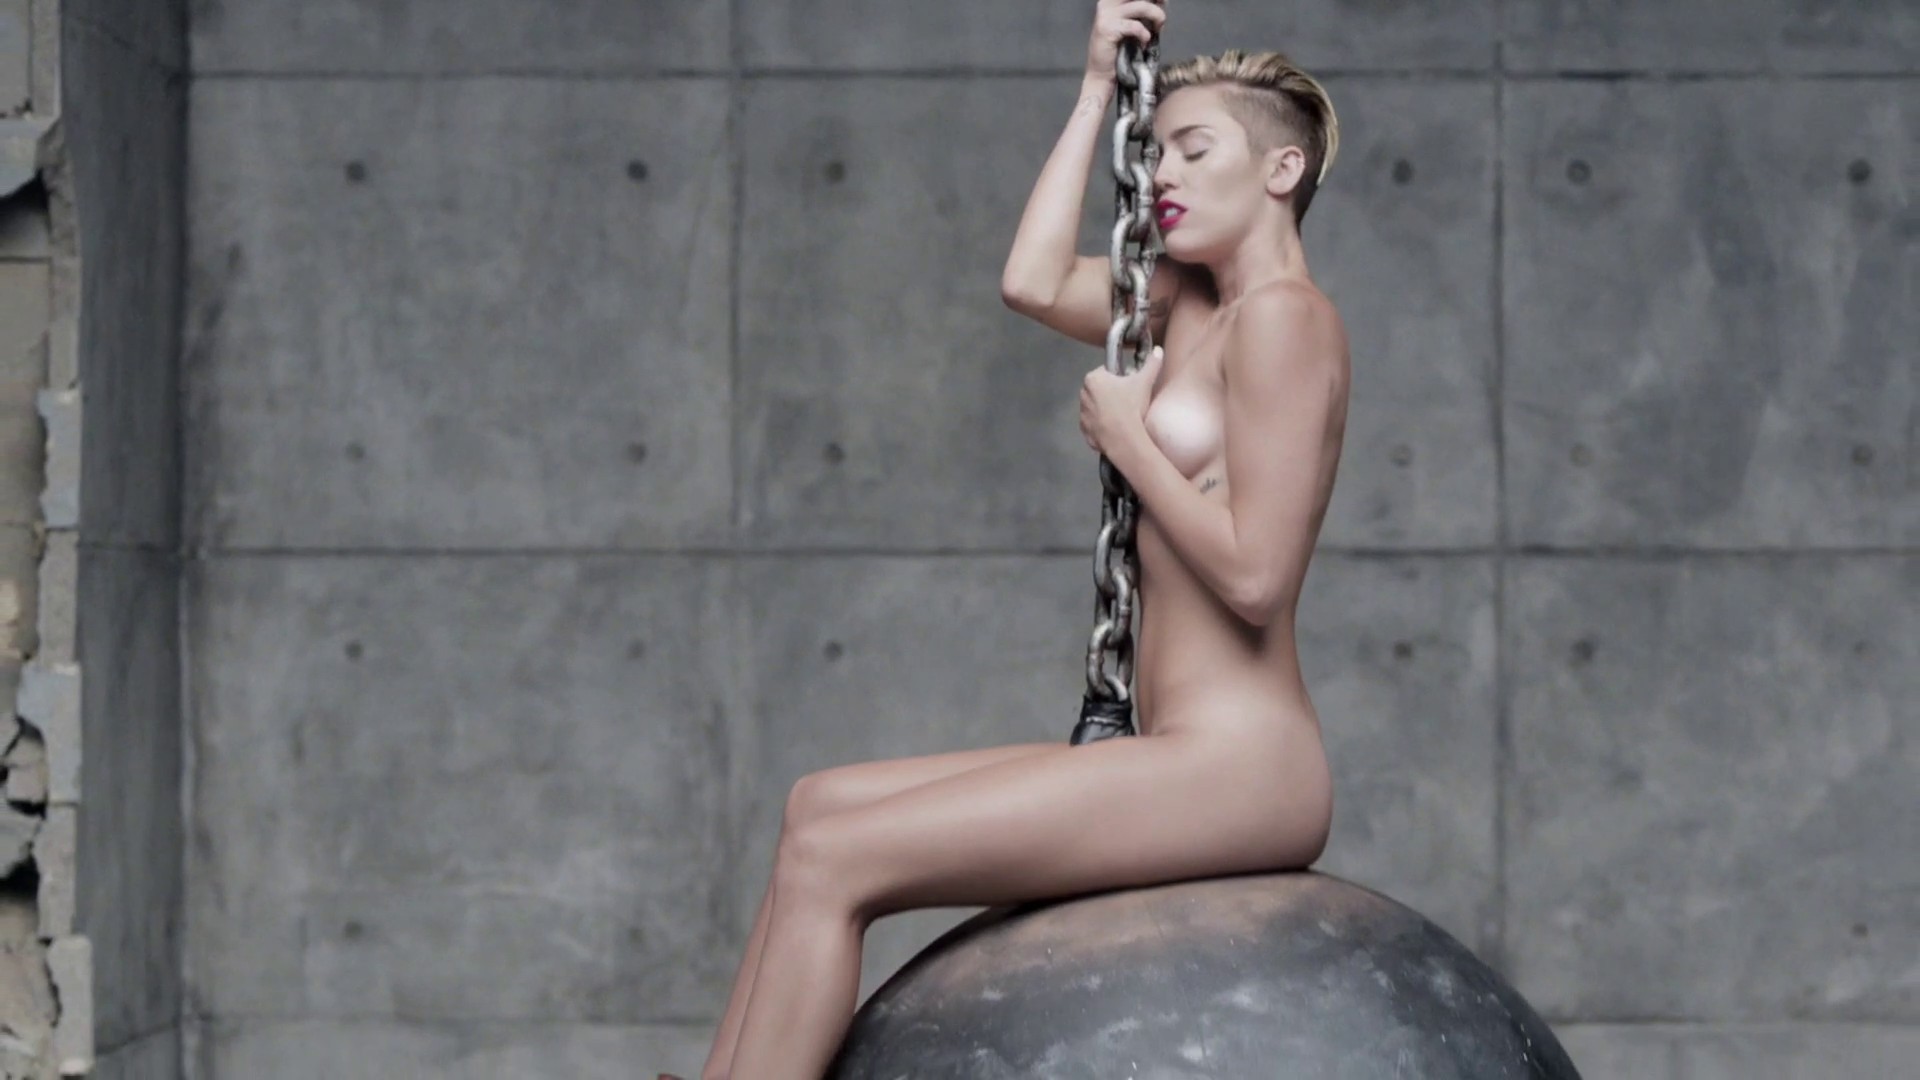 Miley Cyrus - Wrecking Ball explicit uncensored video 1080p2913.jpg